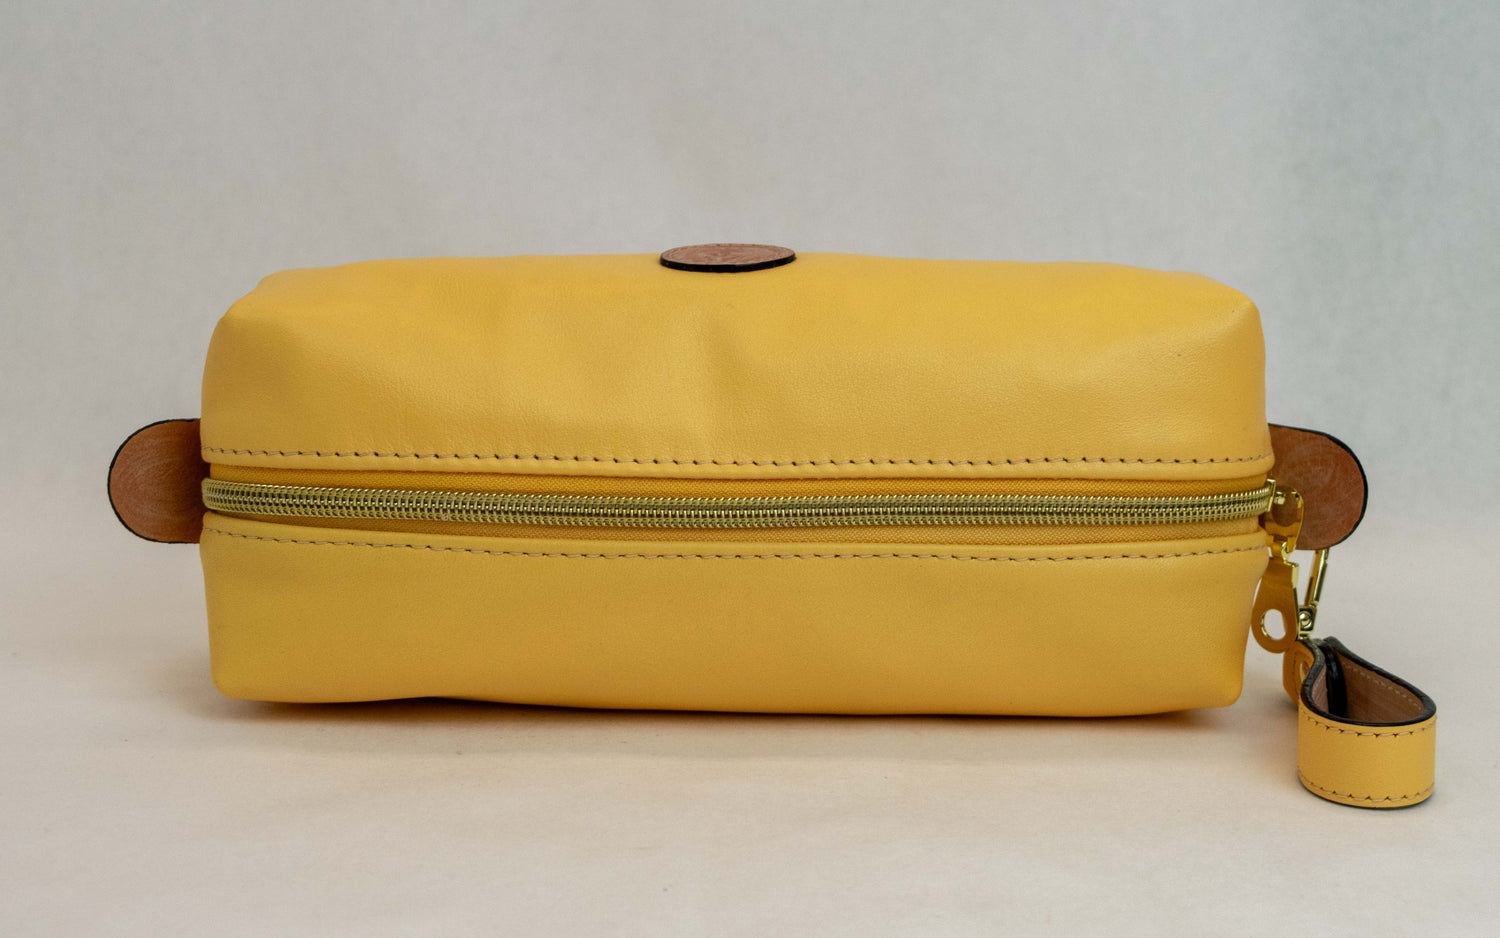 Top view of T5 bath dopp kit toiletry wash bag designer handcrafted of smooth calf leather in saffron yellow.